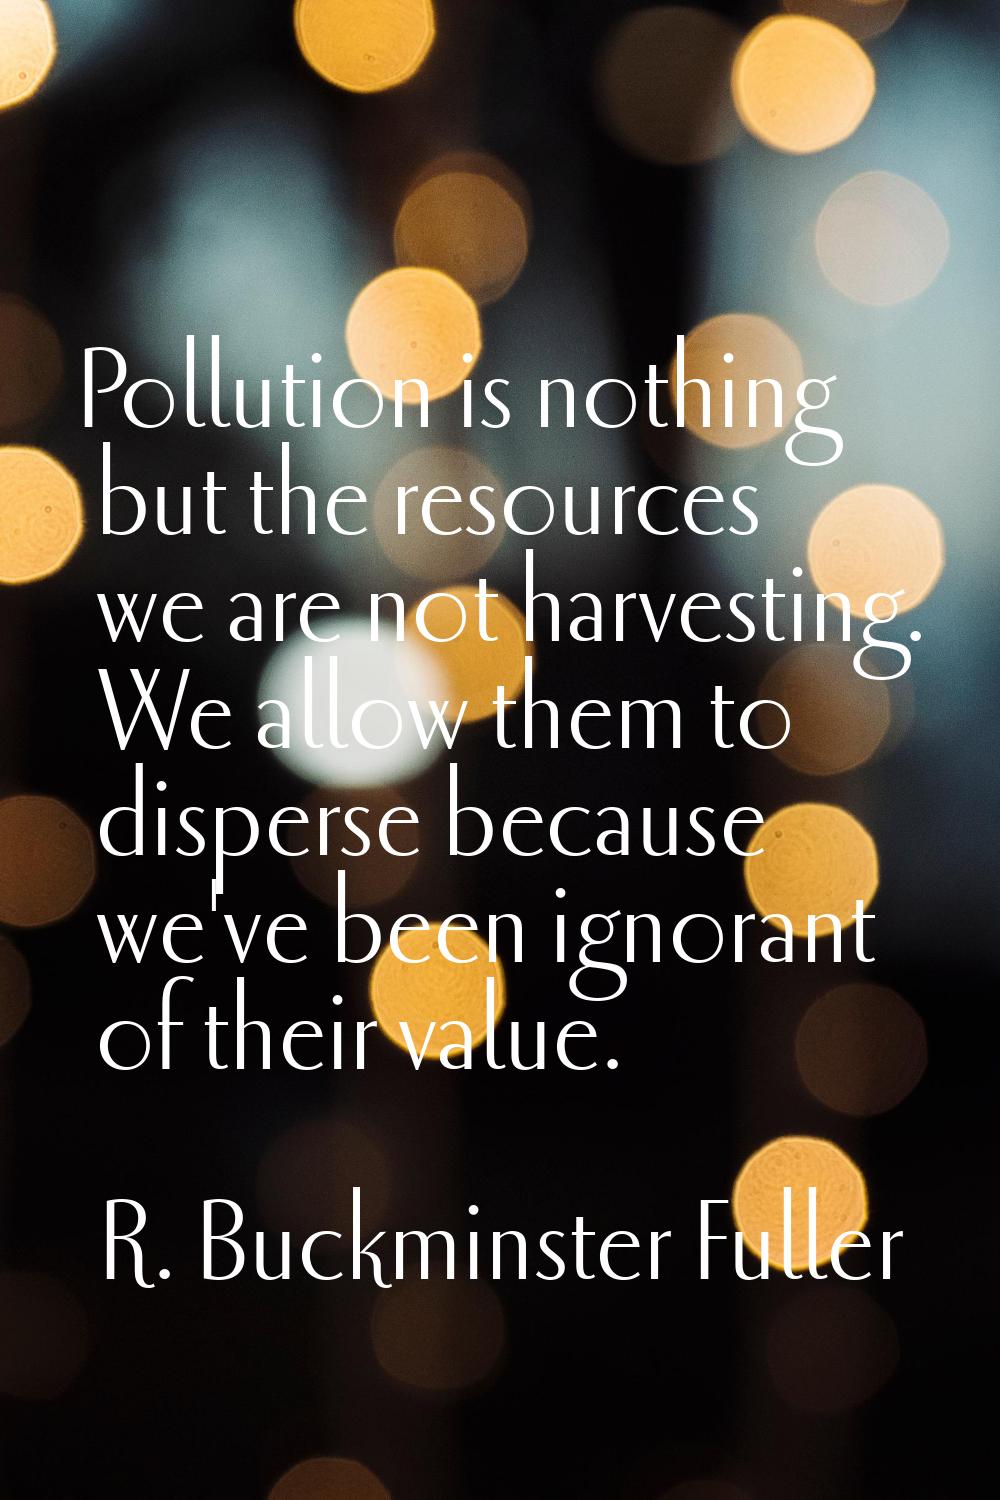 Pollution is nothing but the resources we are not harvesting. We allow them to disperse because we'